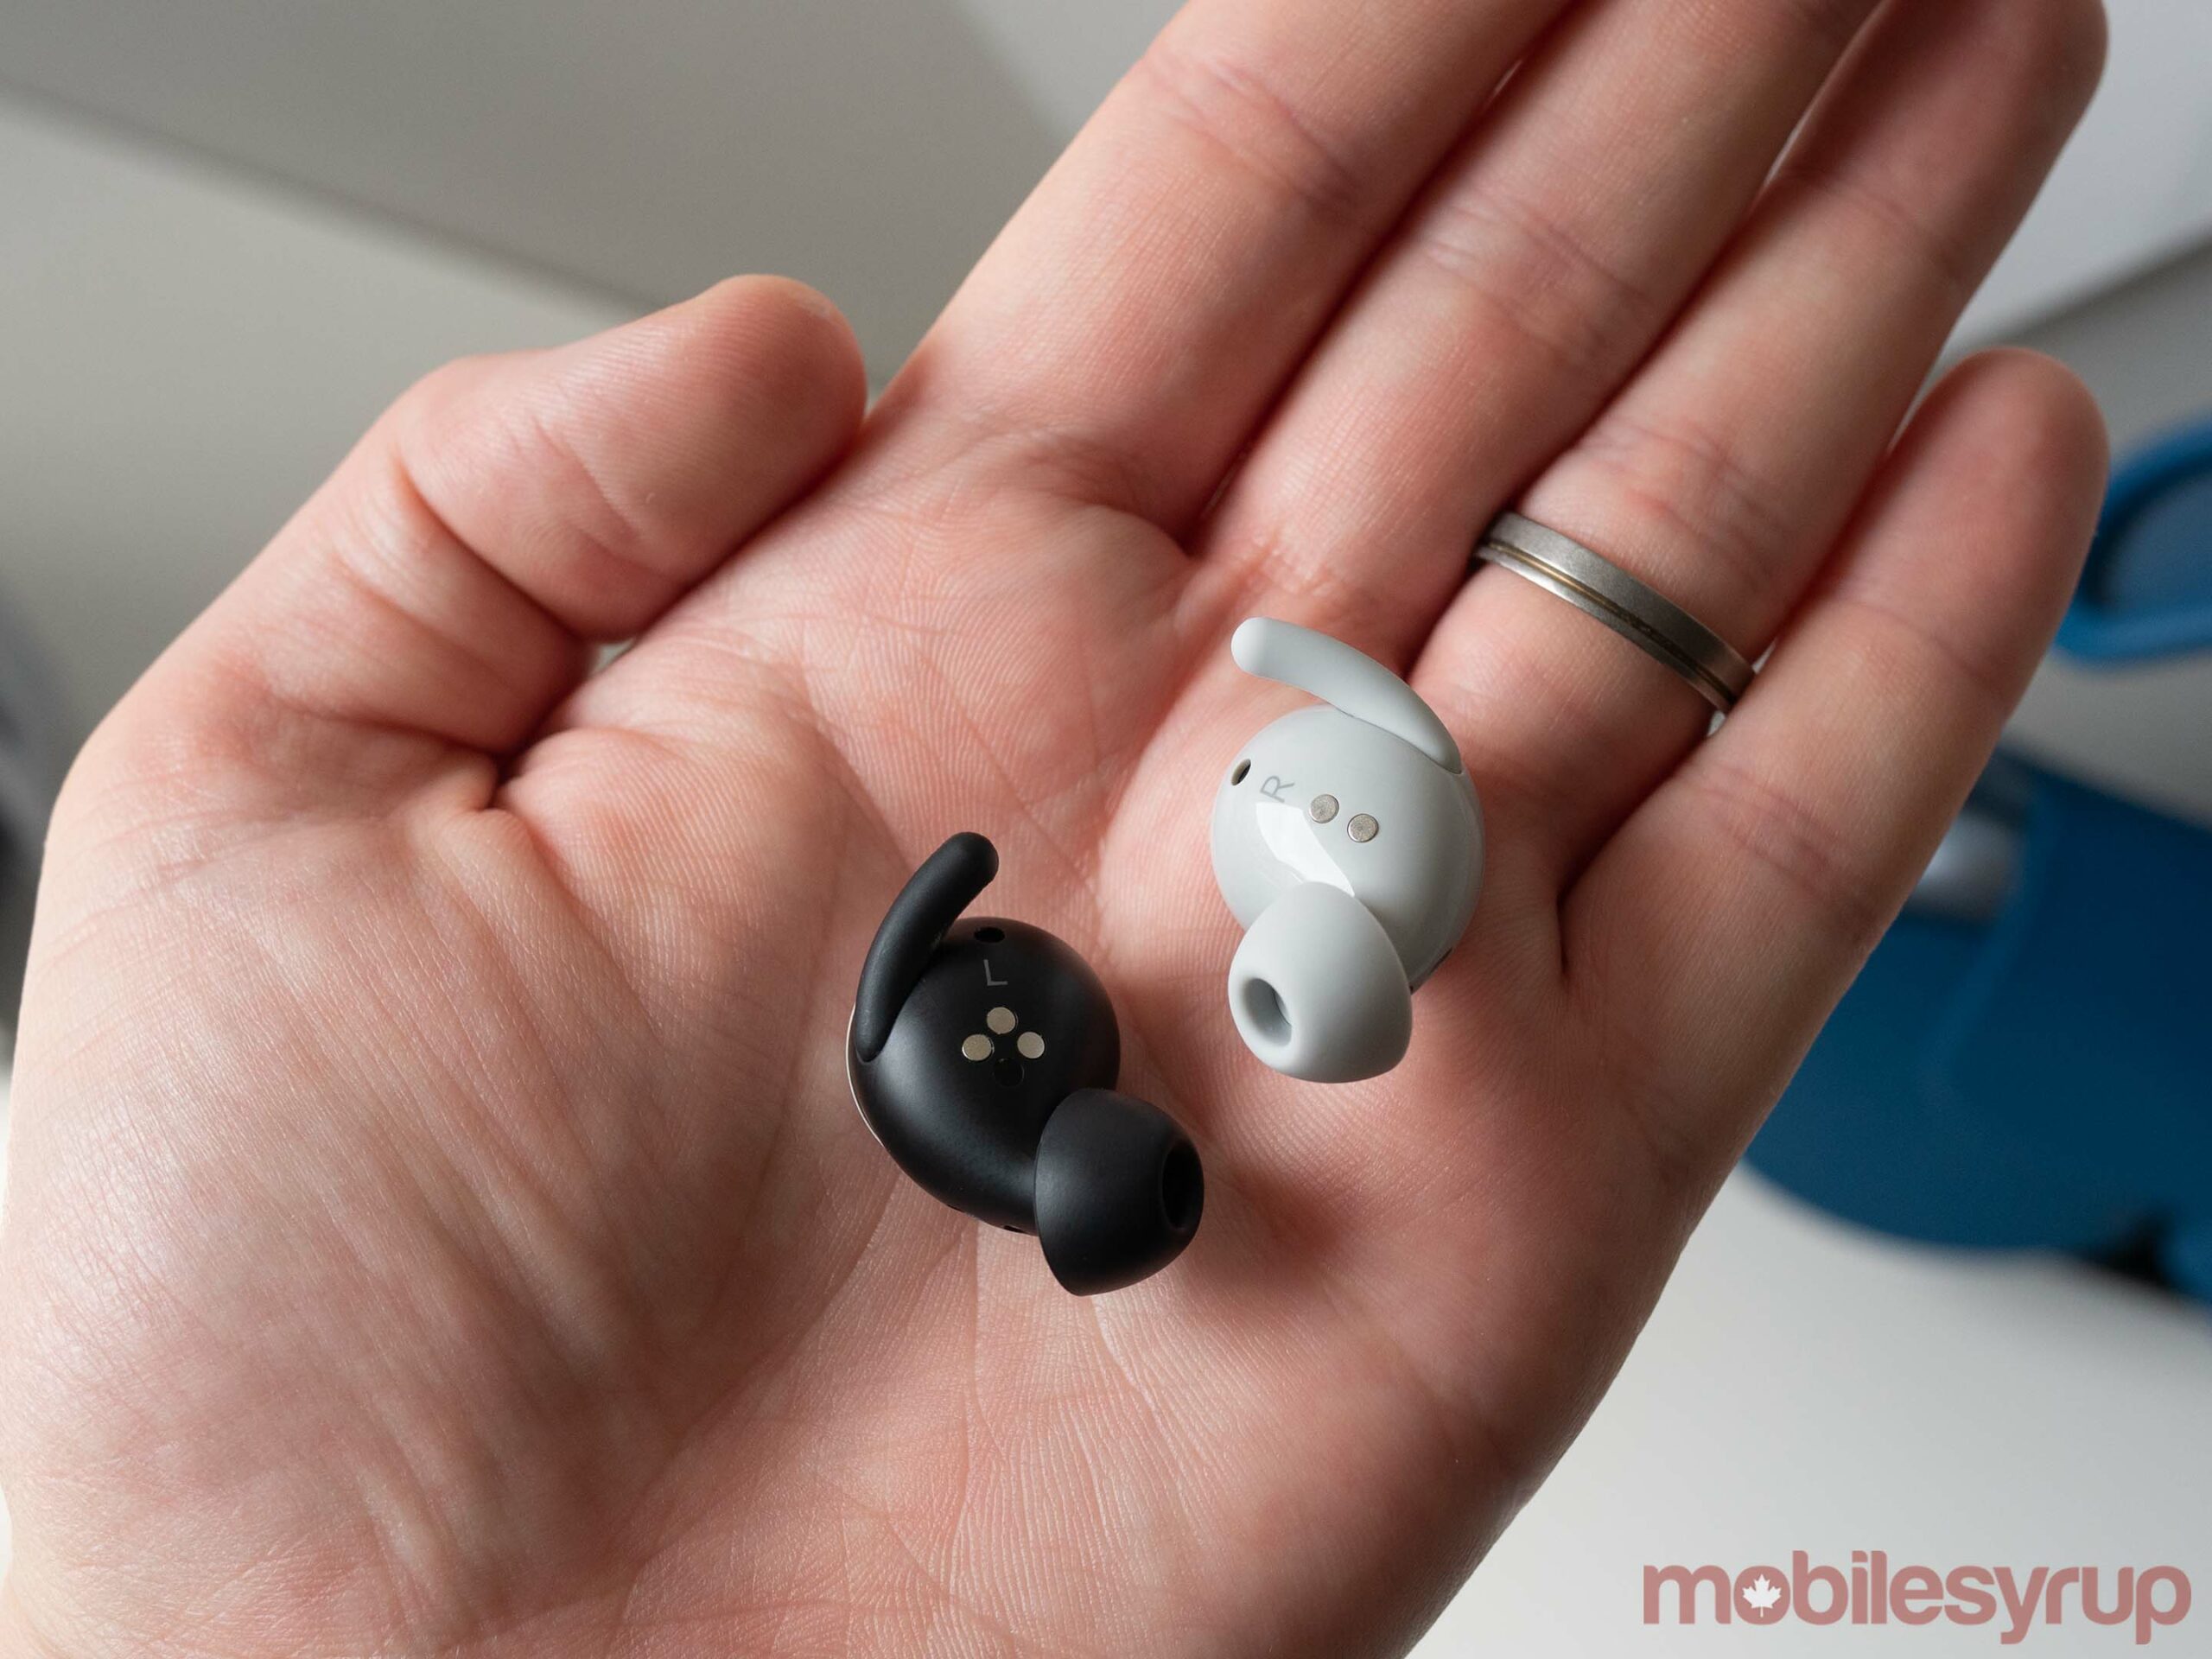 Pixel Buds Series-A beside the Pixel Buds (2020) 